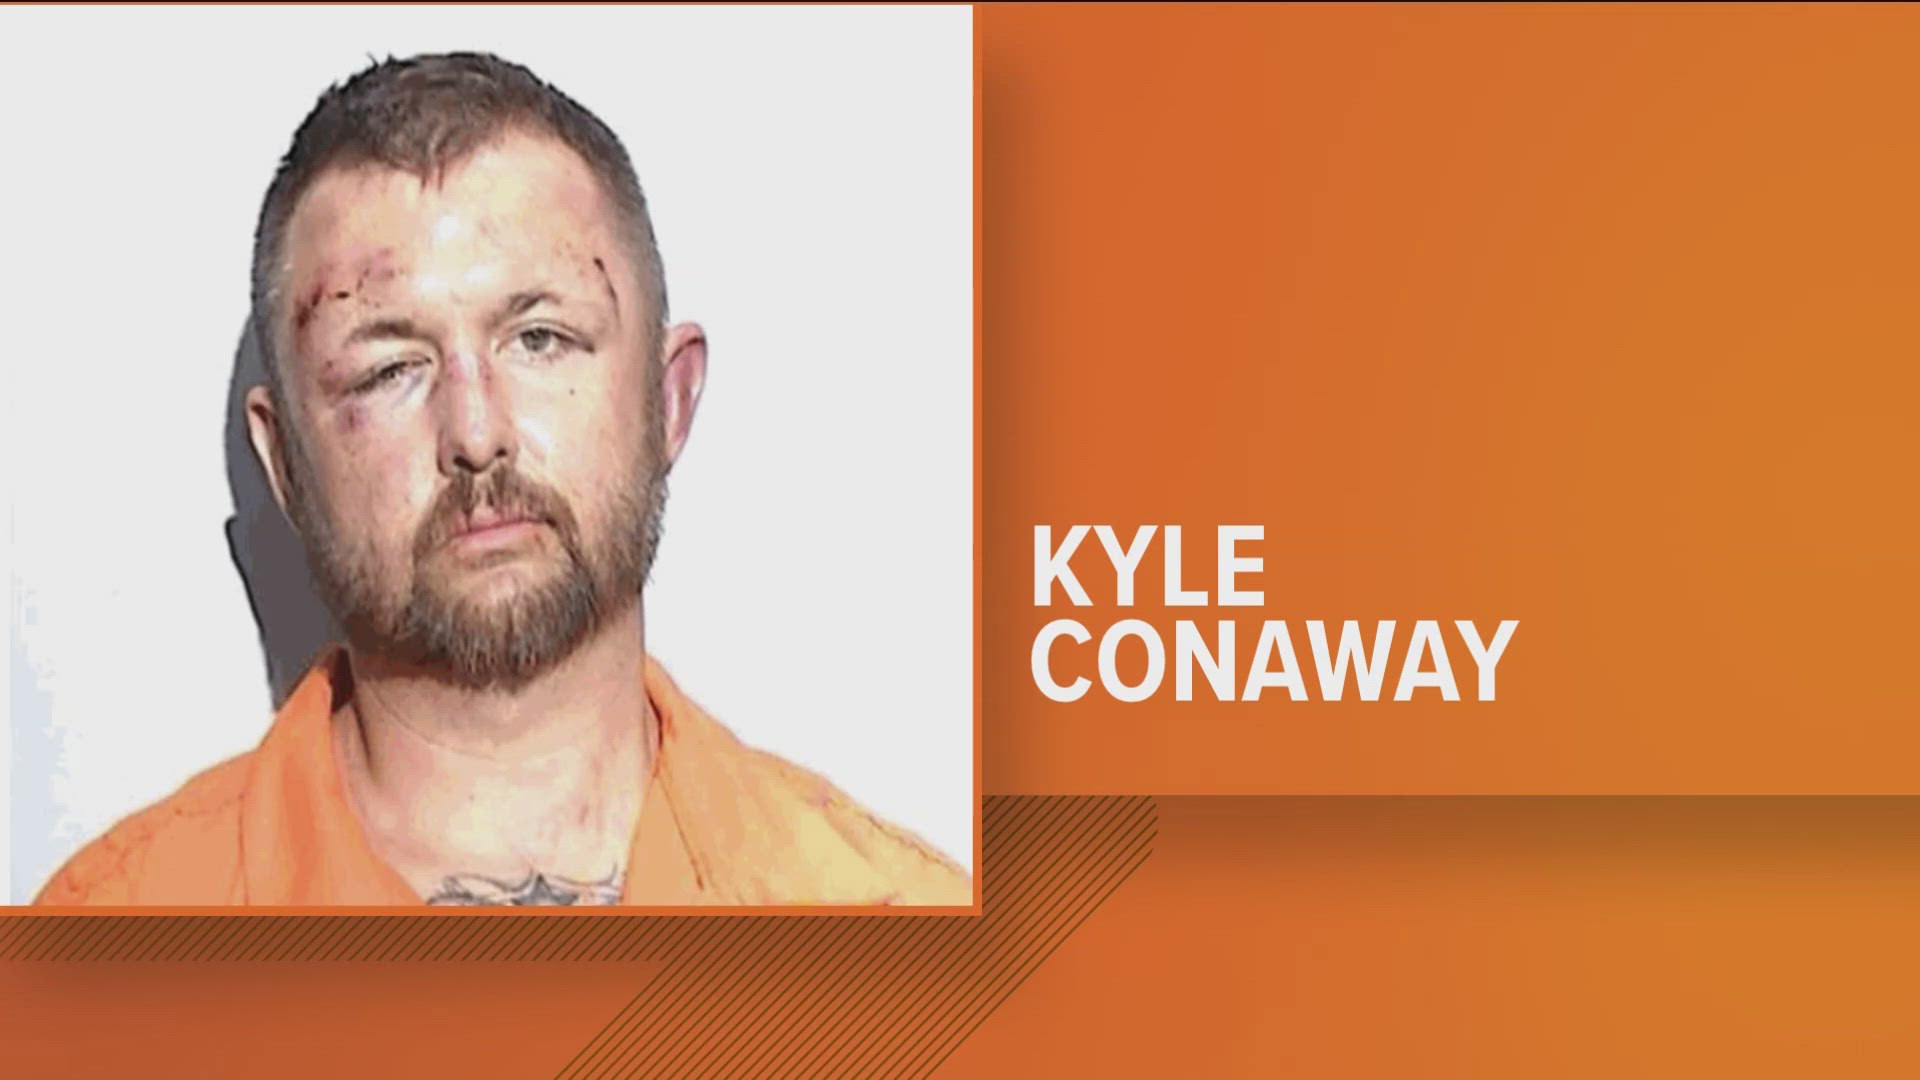 Kyle Conaway, 37, was arrested in a Lowe's parking lot, where he allegedly punched an officer in the head.